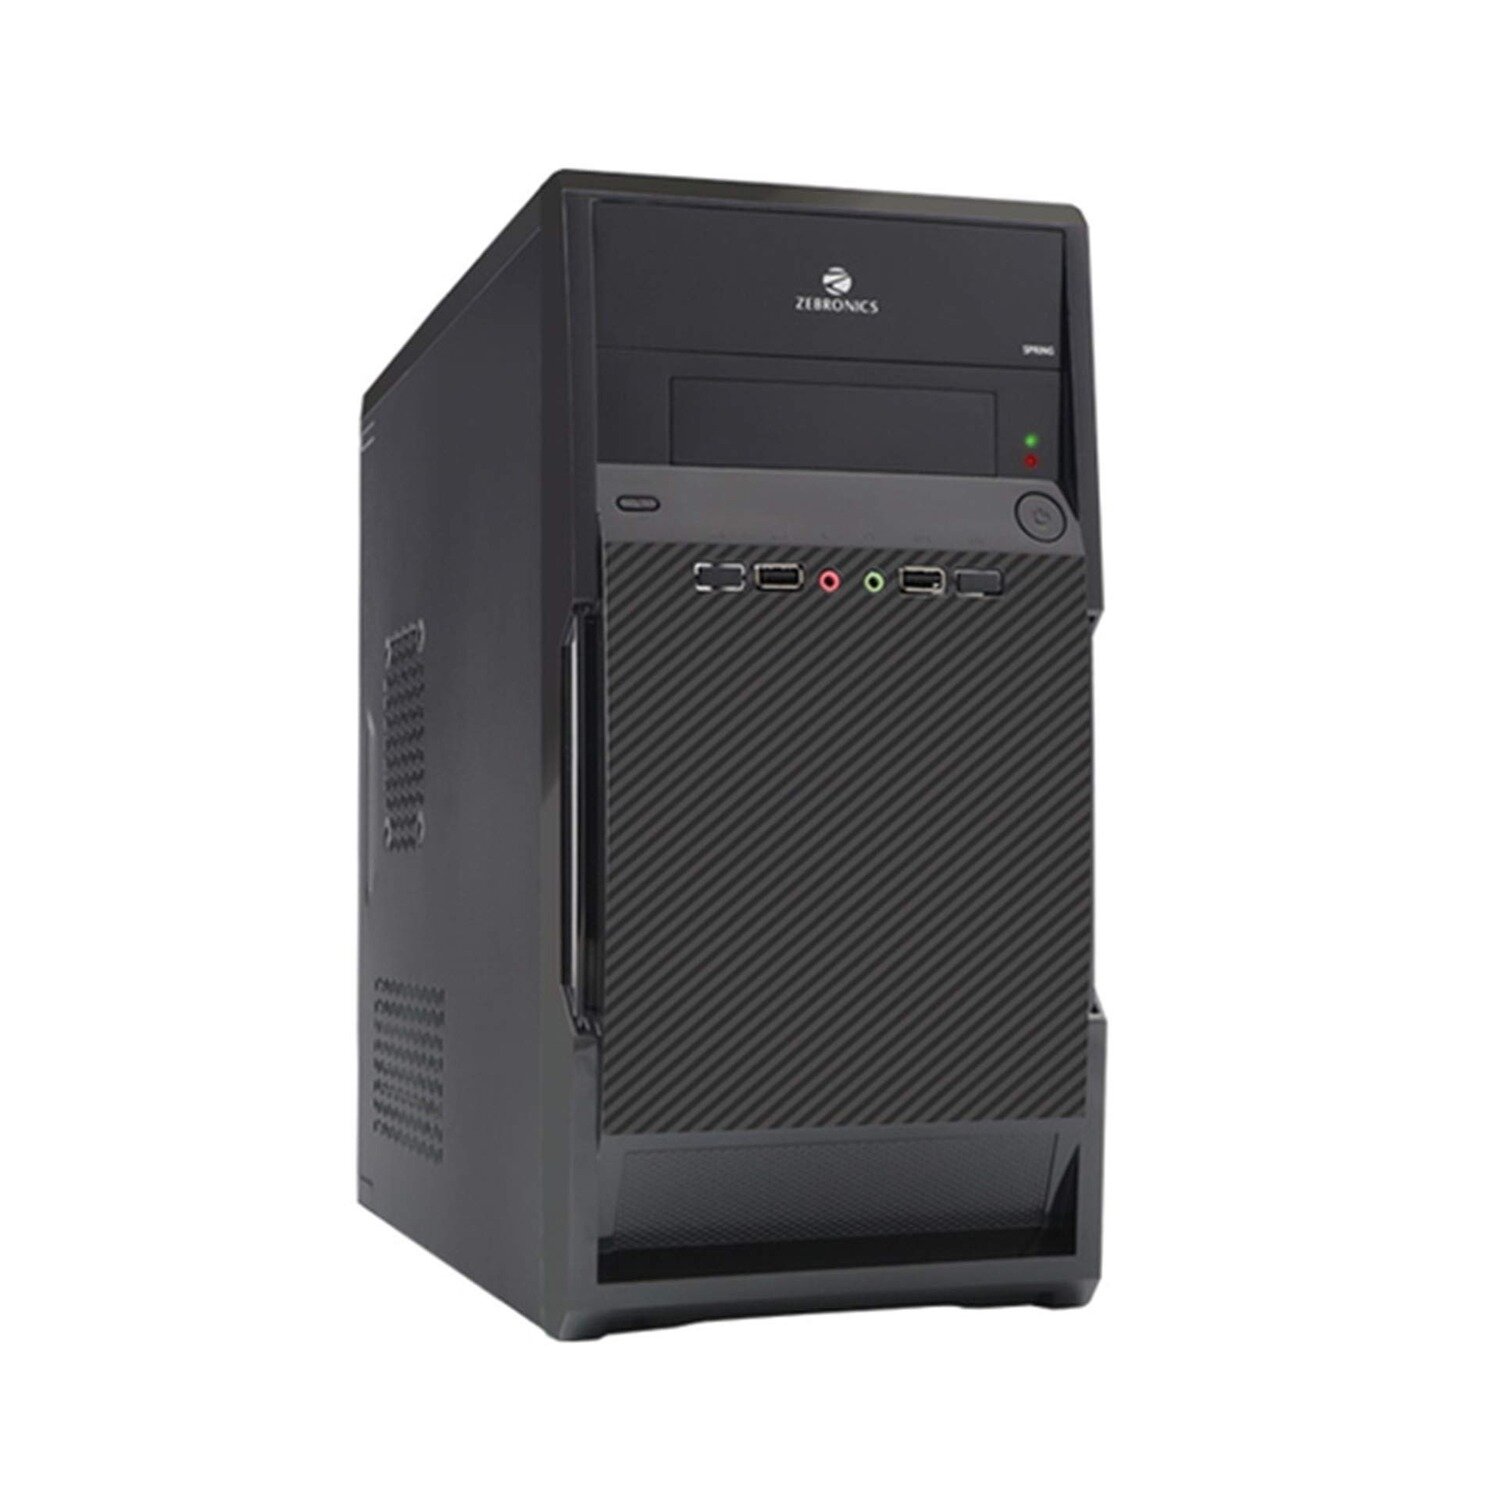 Core I5-650 3.2Ghz Desktop PC for Home & Office - 8GB RAM / 250 GB SSD / 500GB HDD